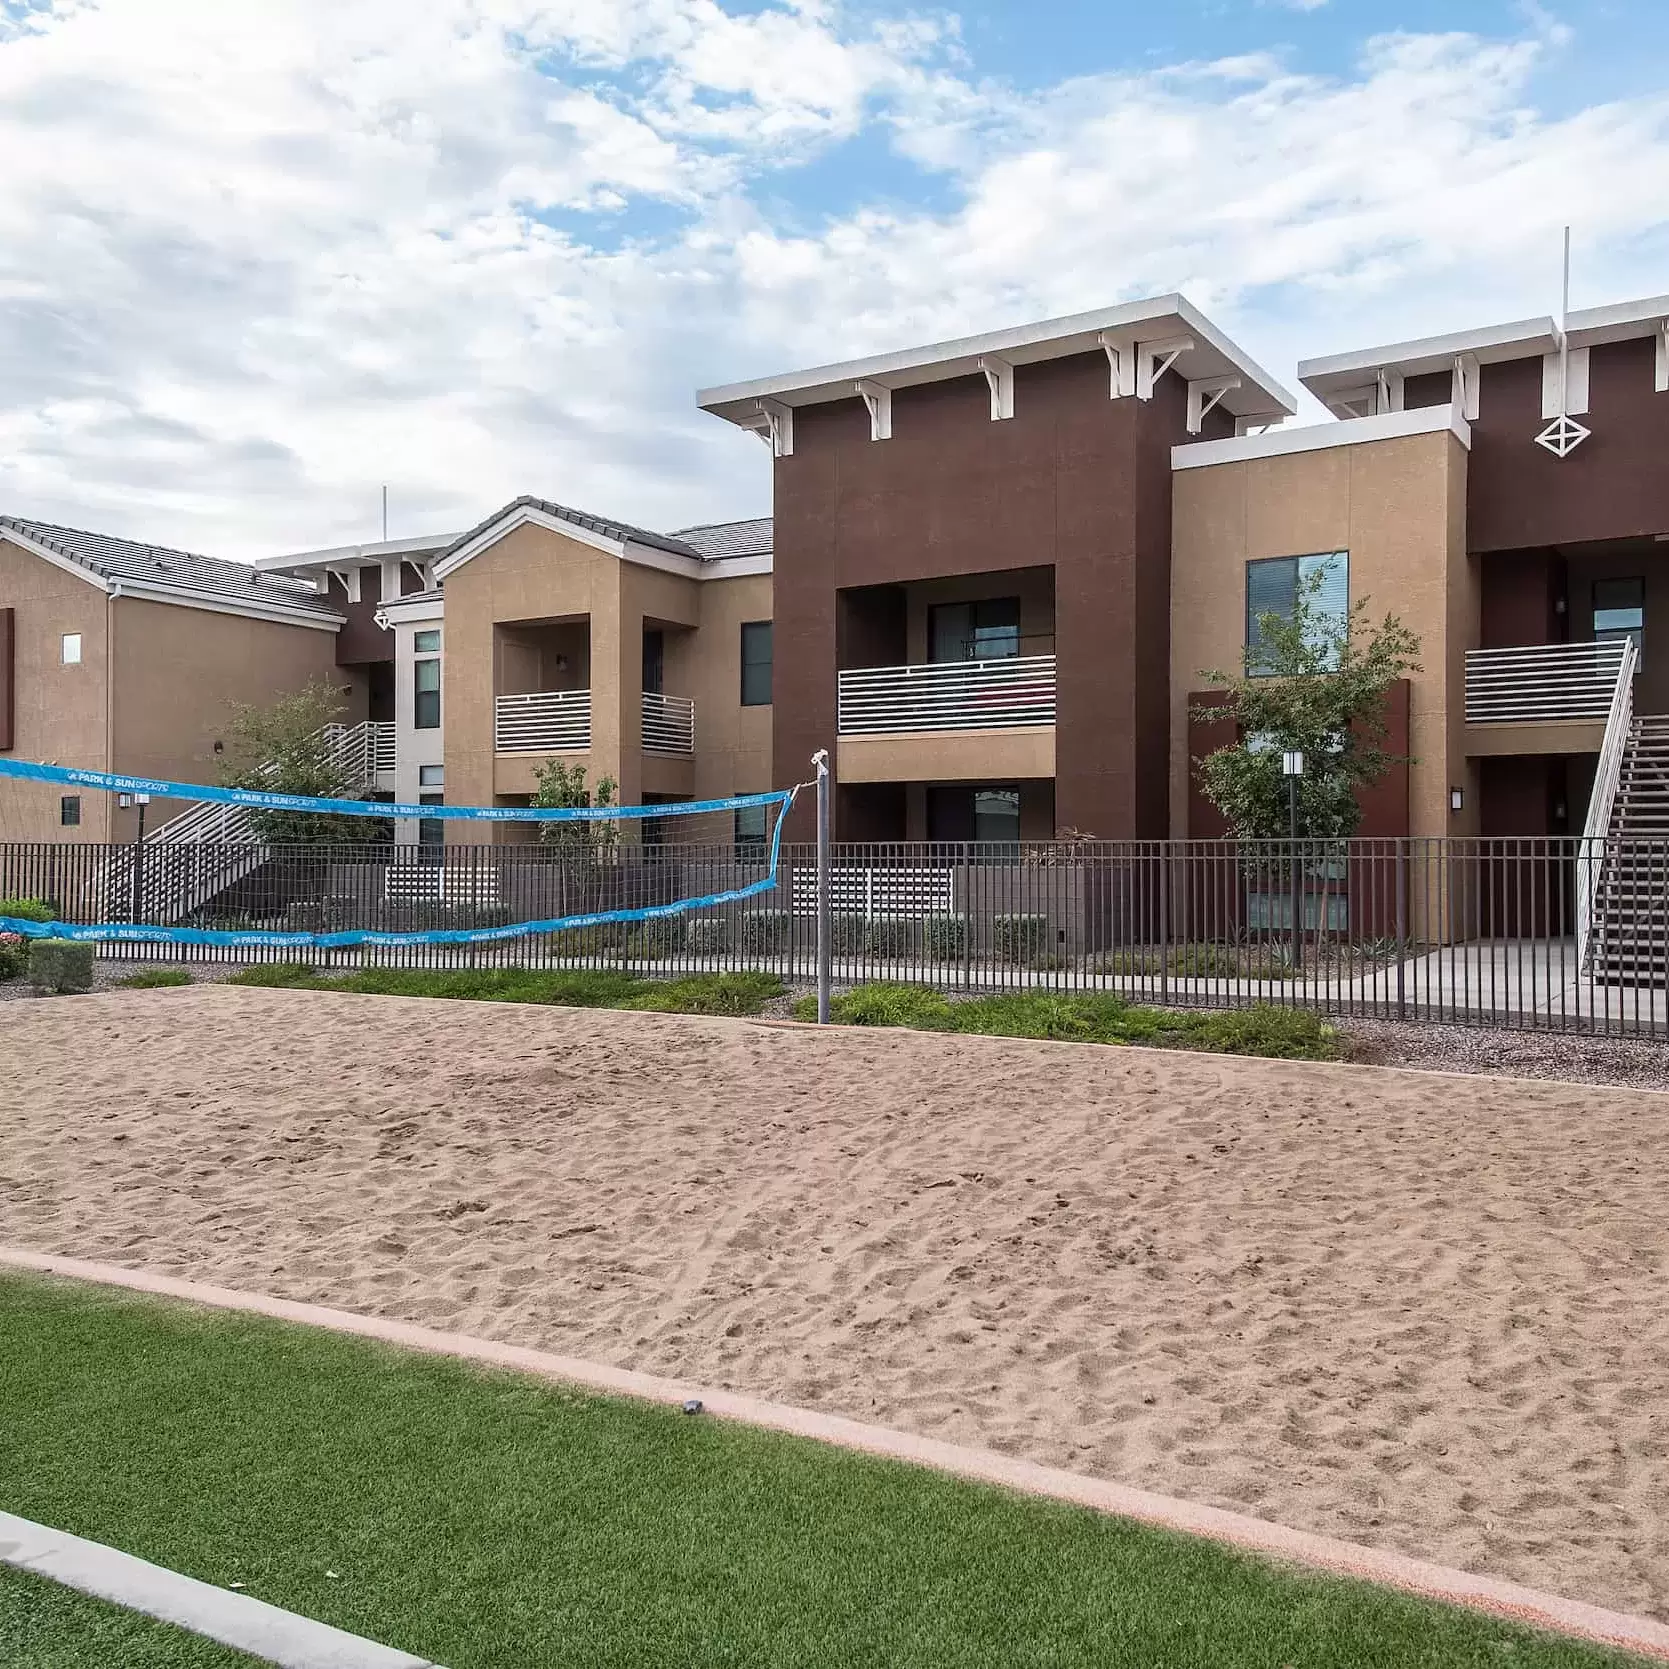 A sand volleyball court in front of apartment buildings.